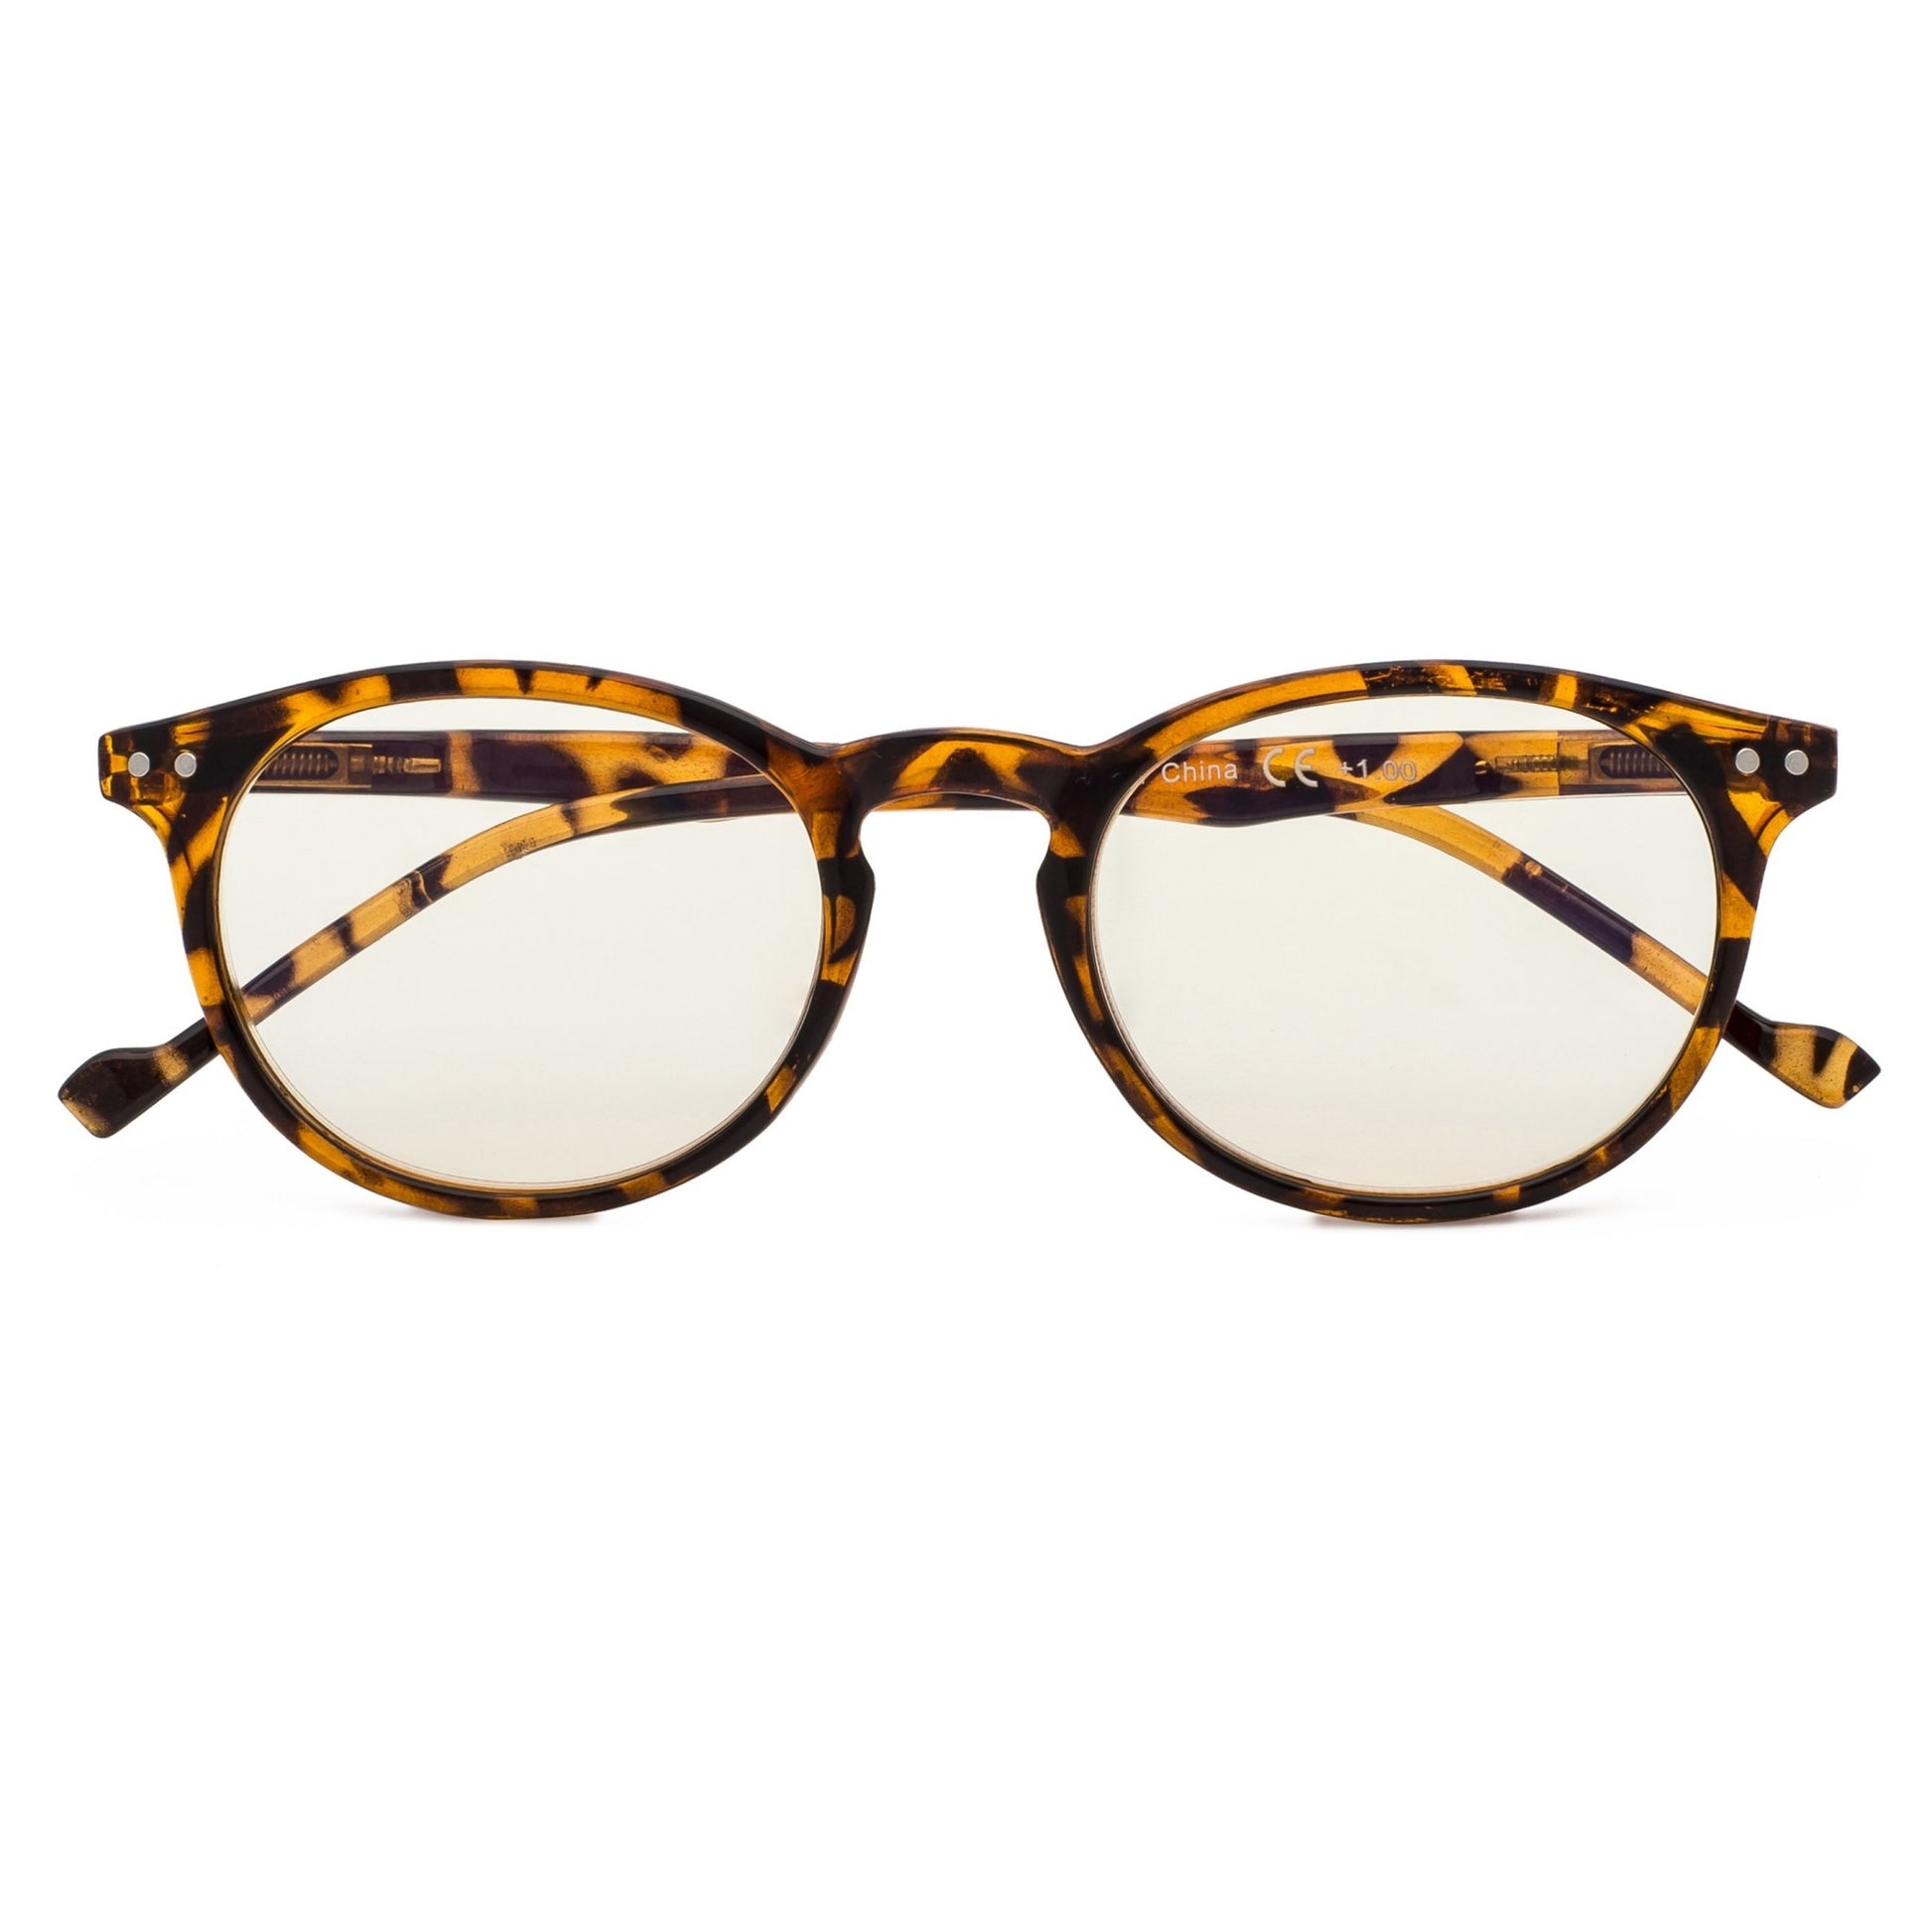 Oval Round Computer Reading Glasses Tortoise 1-CG071